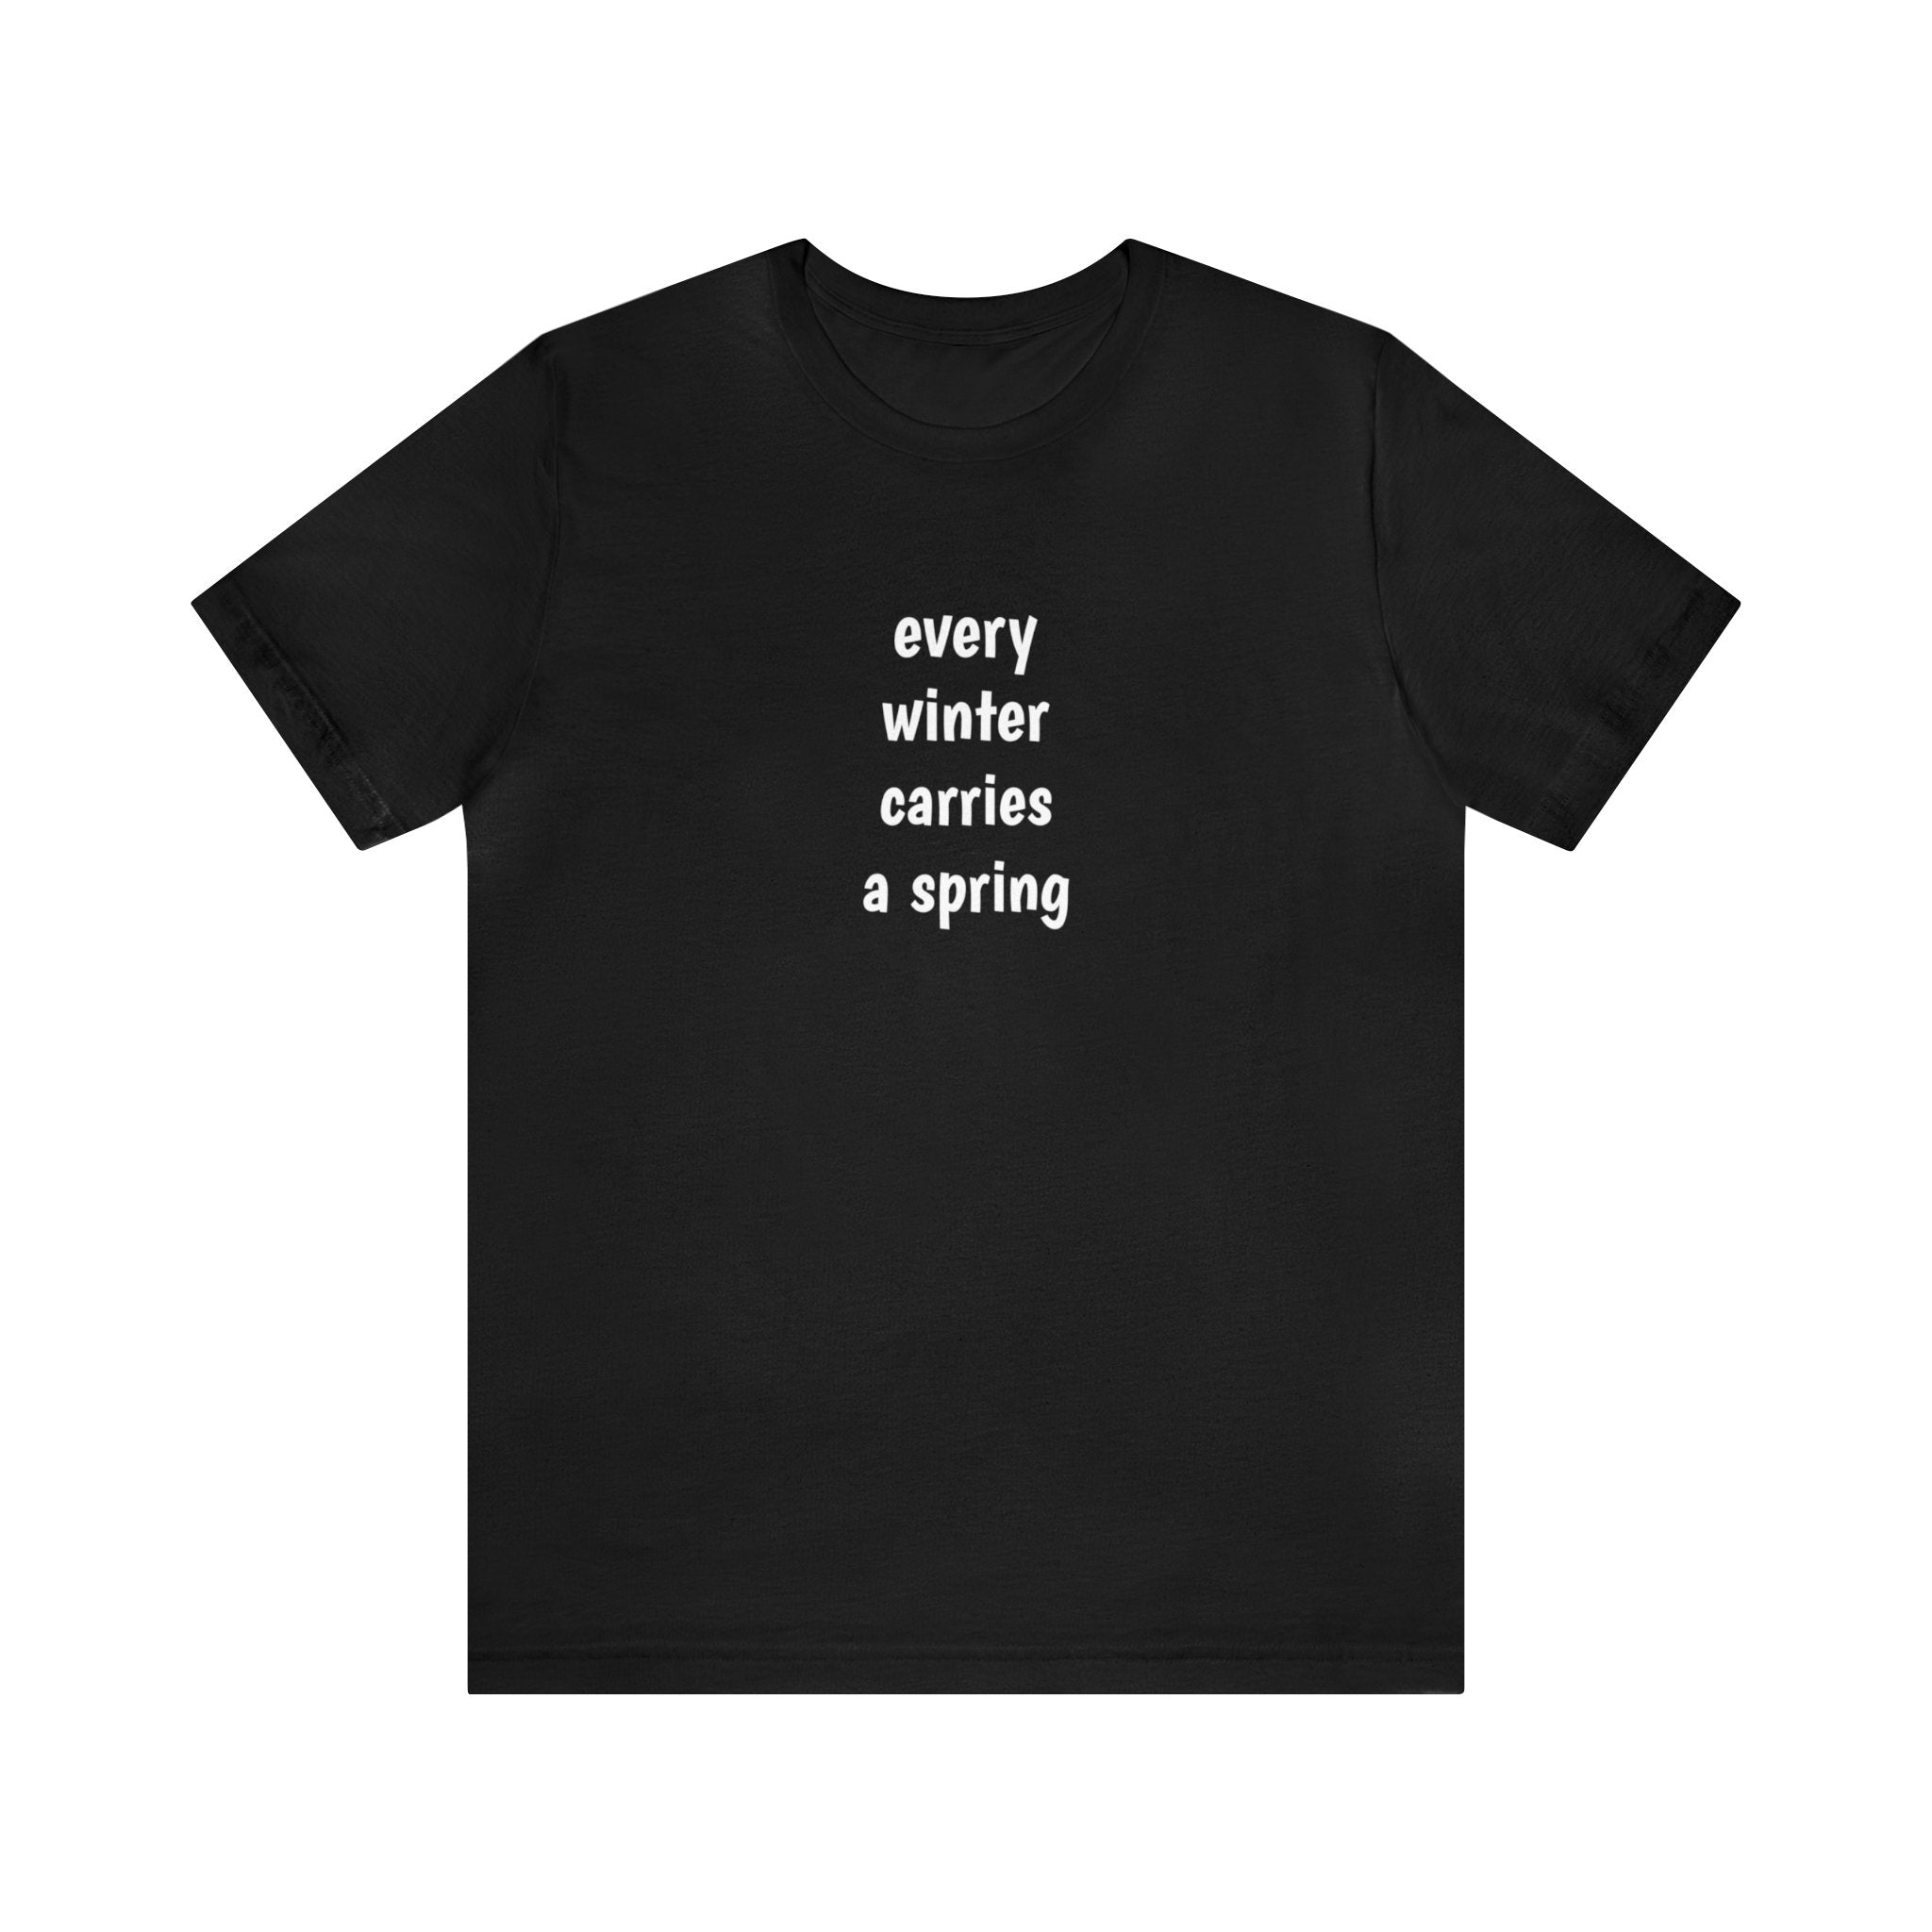 #1020 EVERY WINTER CARRIES A SPRING